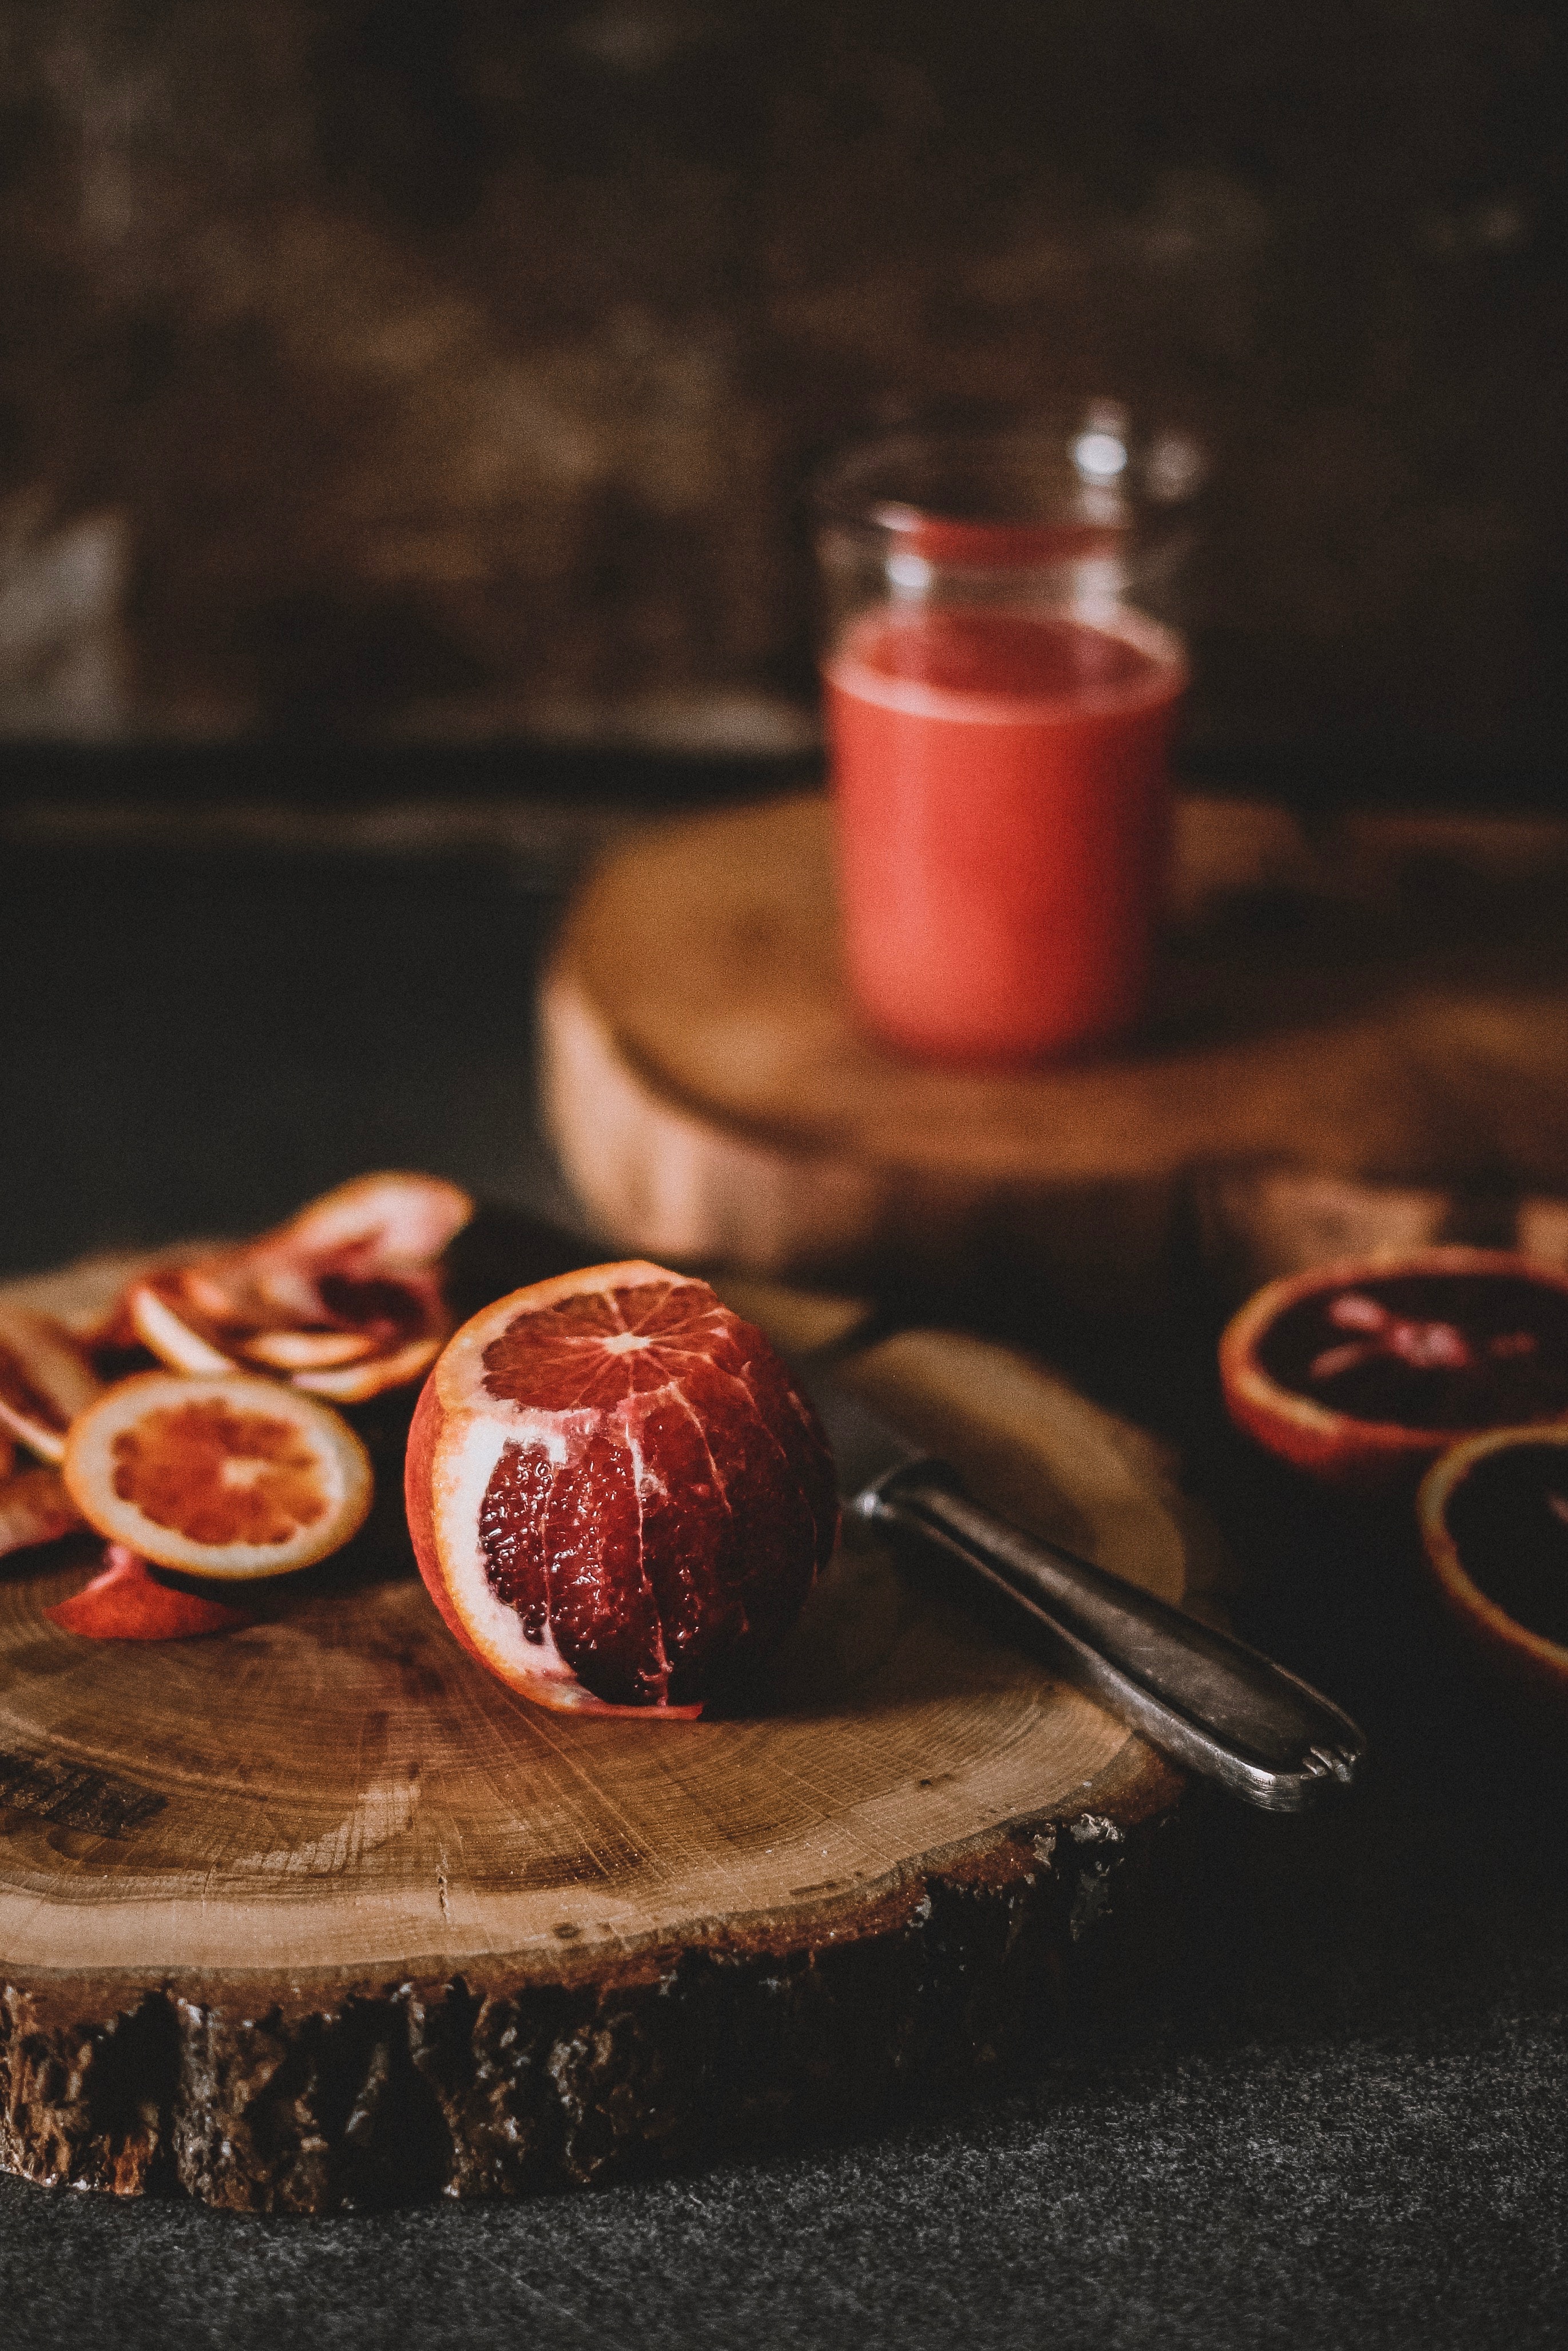 A grapefruit on a chopping board